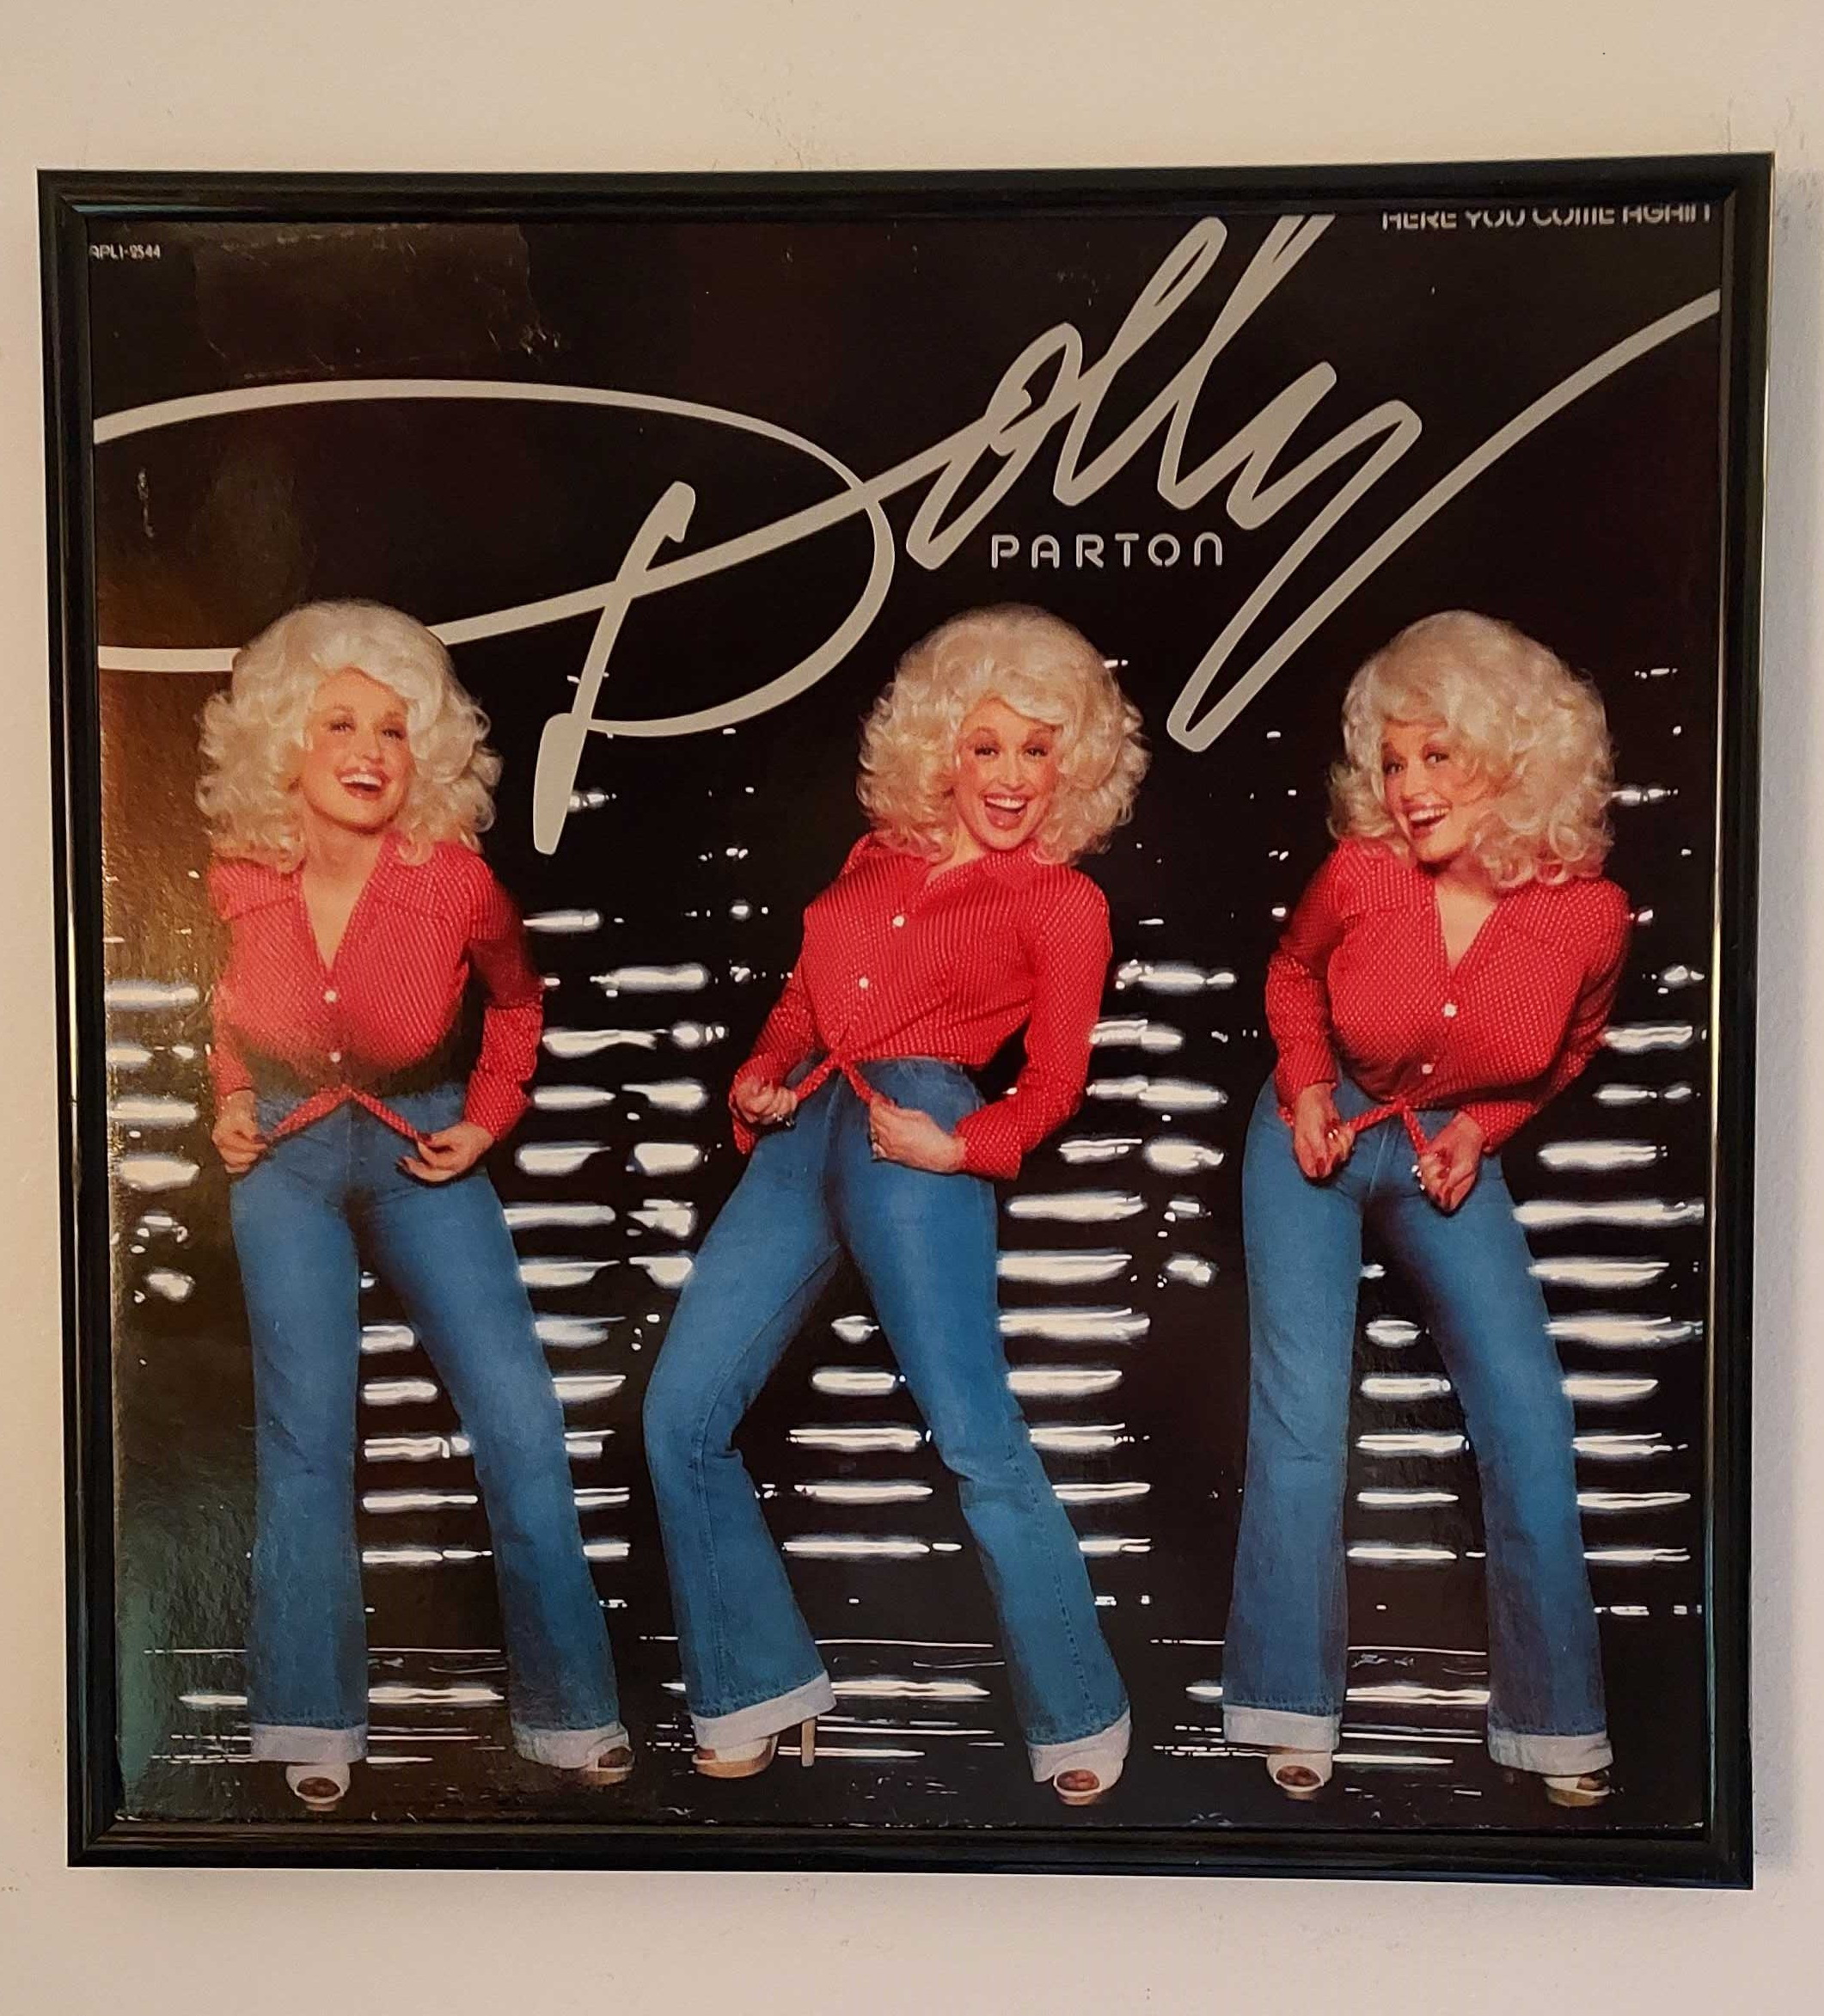 Dolly Parton Framed Album Cover Art Here You Come Again.